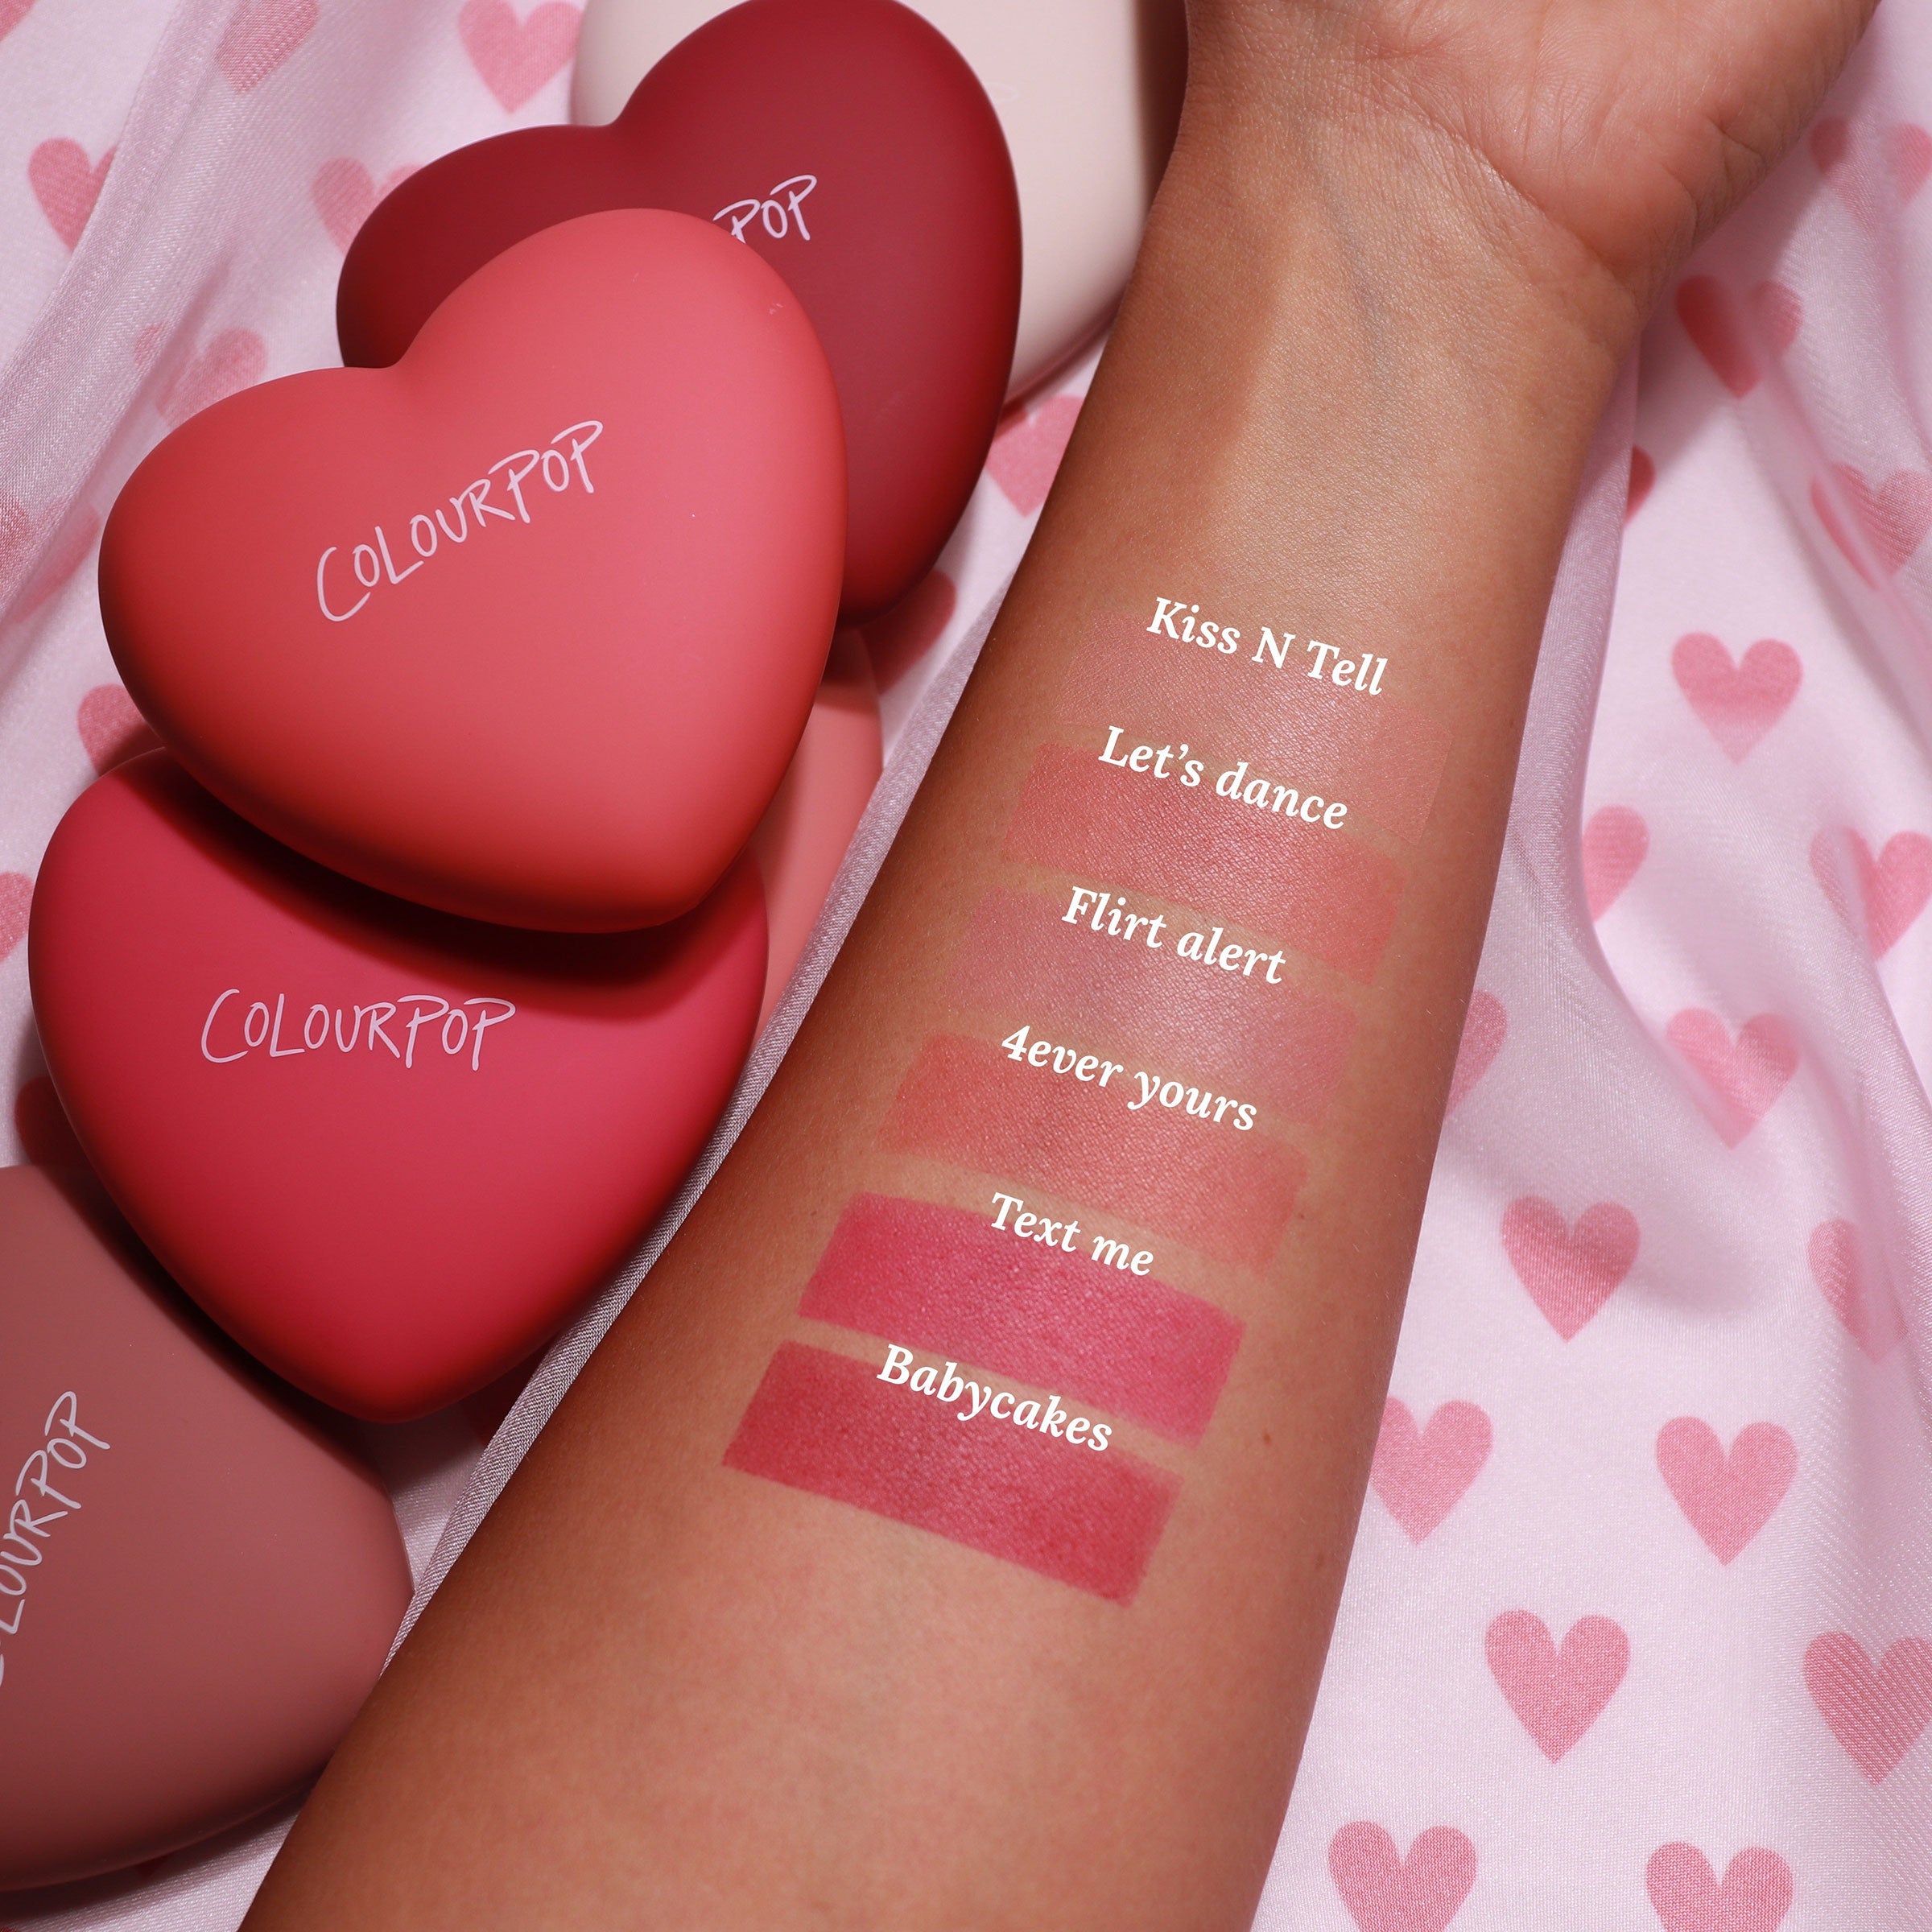 Babycakes Text Me 4ever Yours Let's Dance Flirt Alert Kiss n Tell Pressed Powder Blushes Swatches on Arm